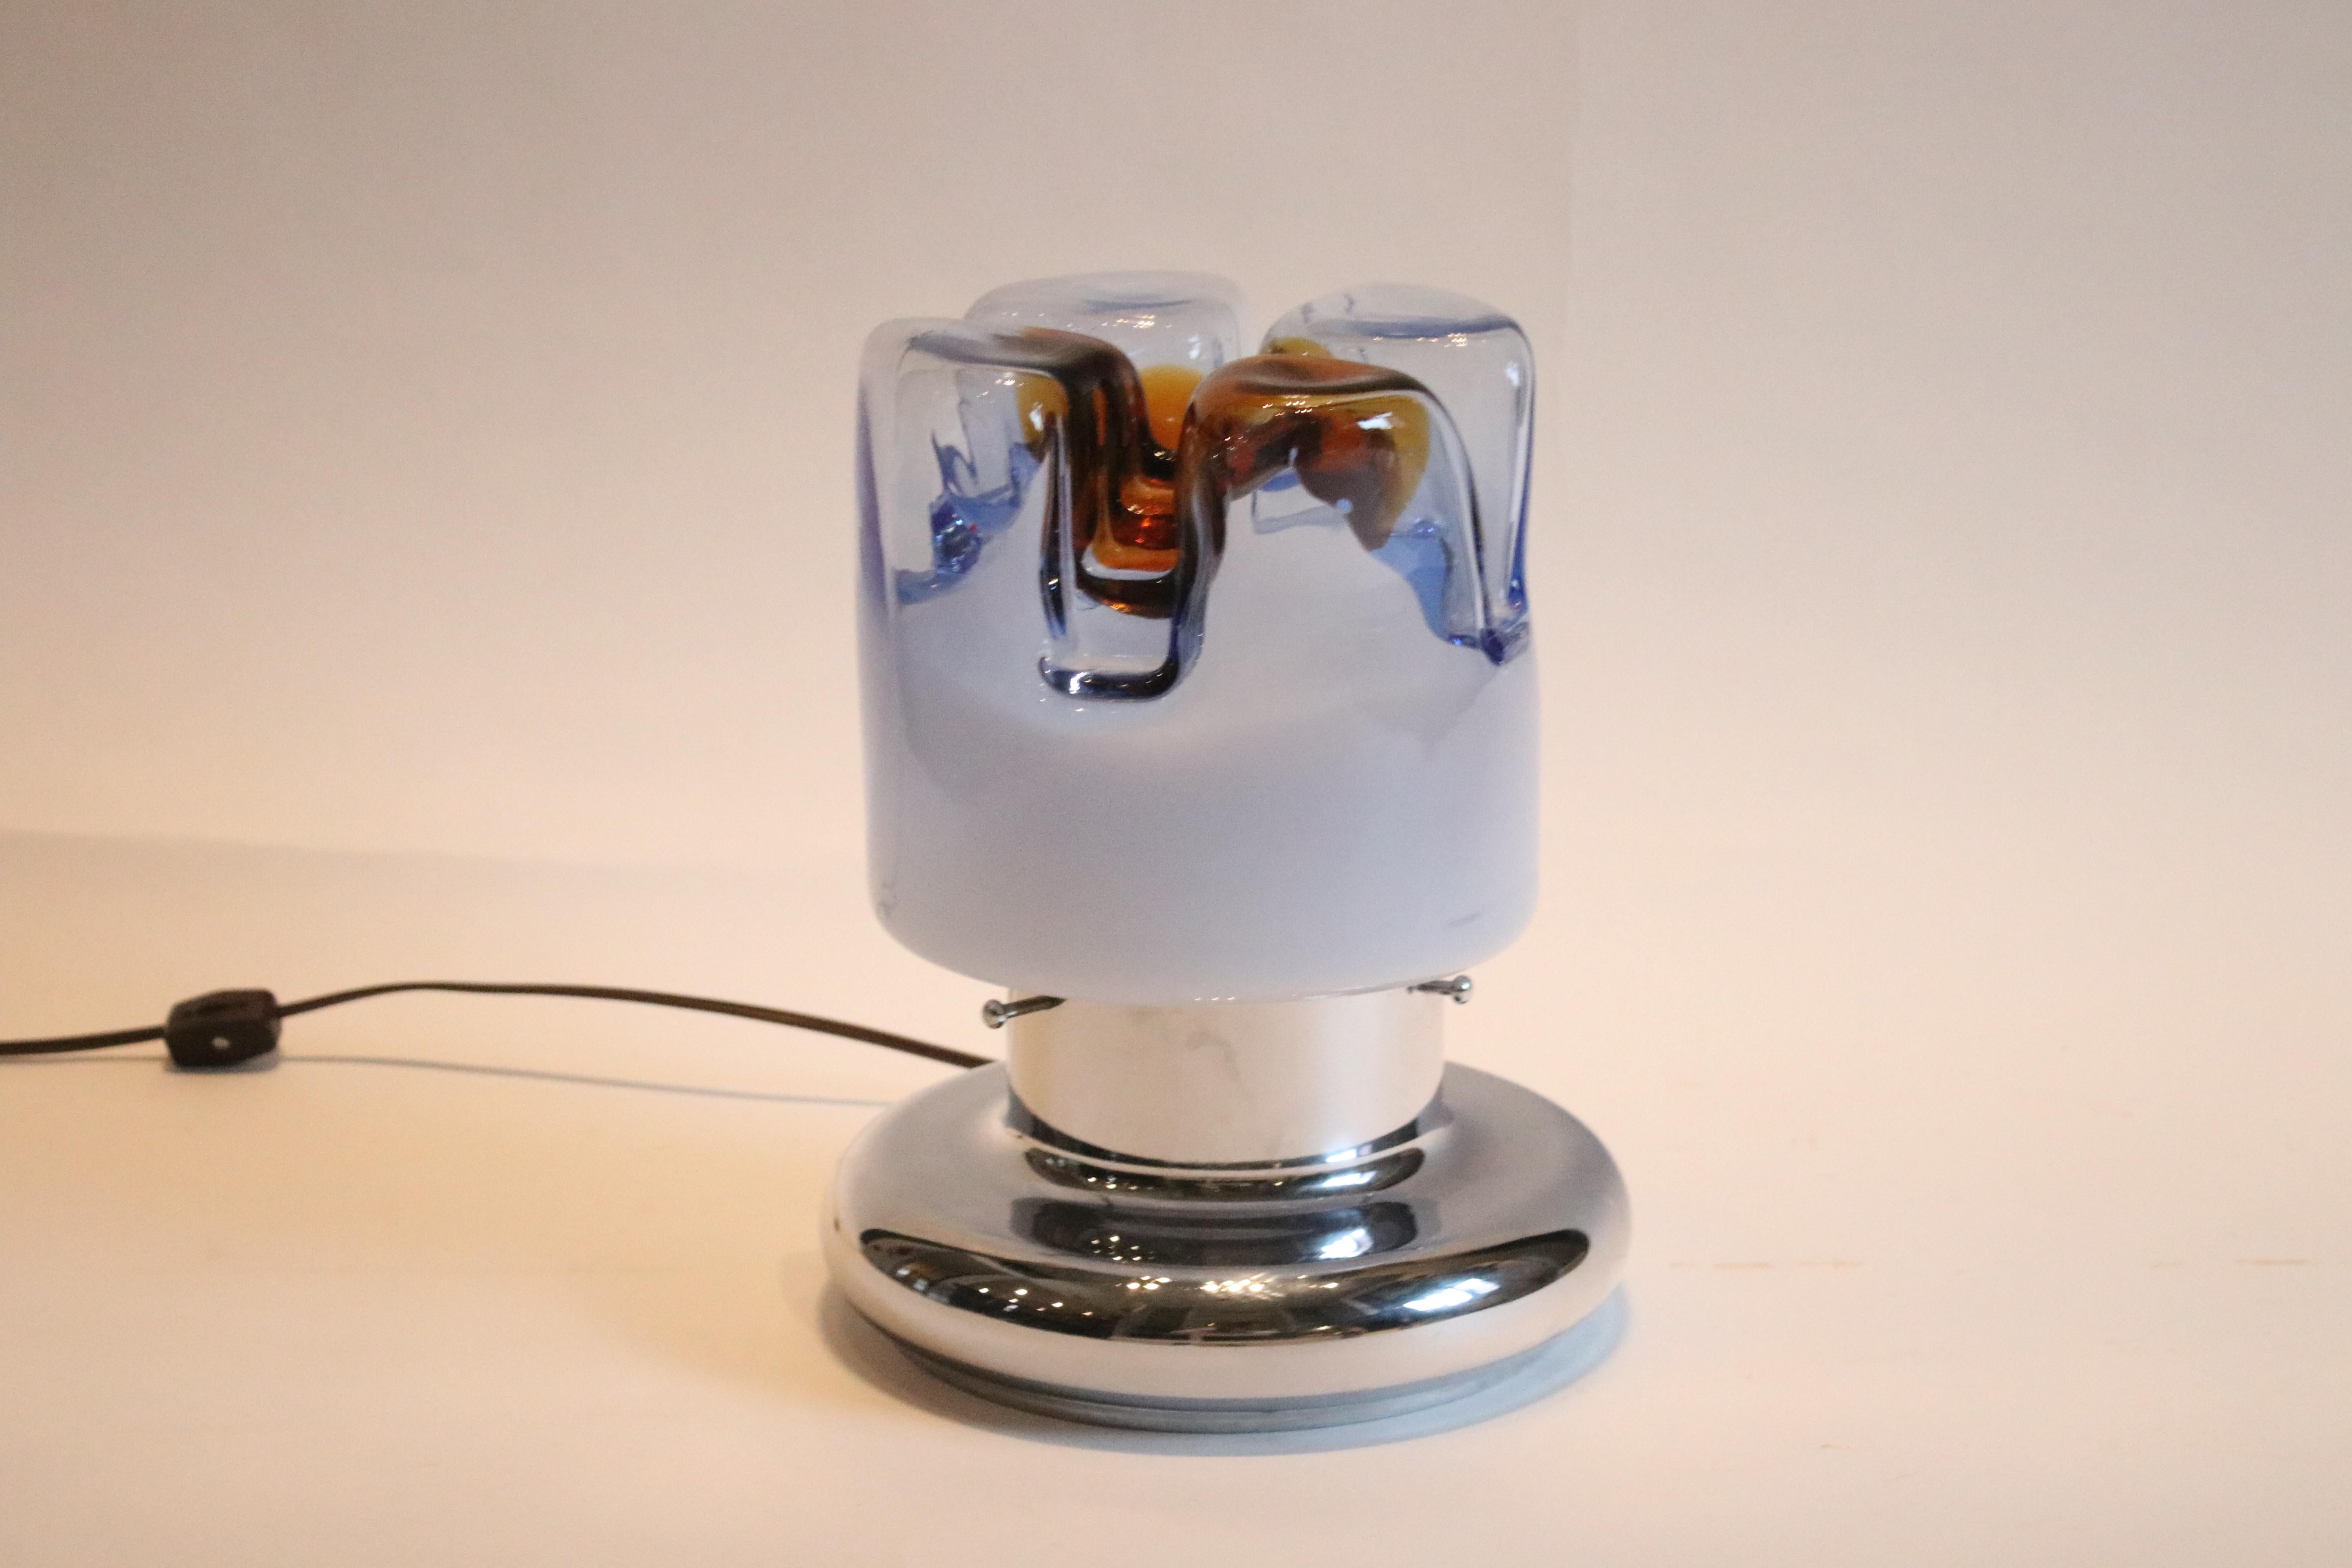 Vintage glass blown table lamp by Mazzega Glass Factory, Murano Italy, Late 1960's- early 1970's in blue and amber on a chrome base. Rewired for US with a cord switch.
